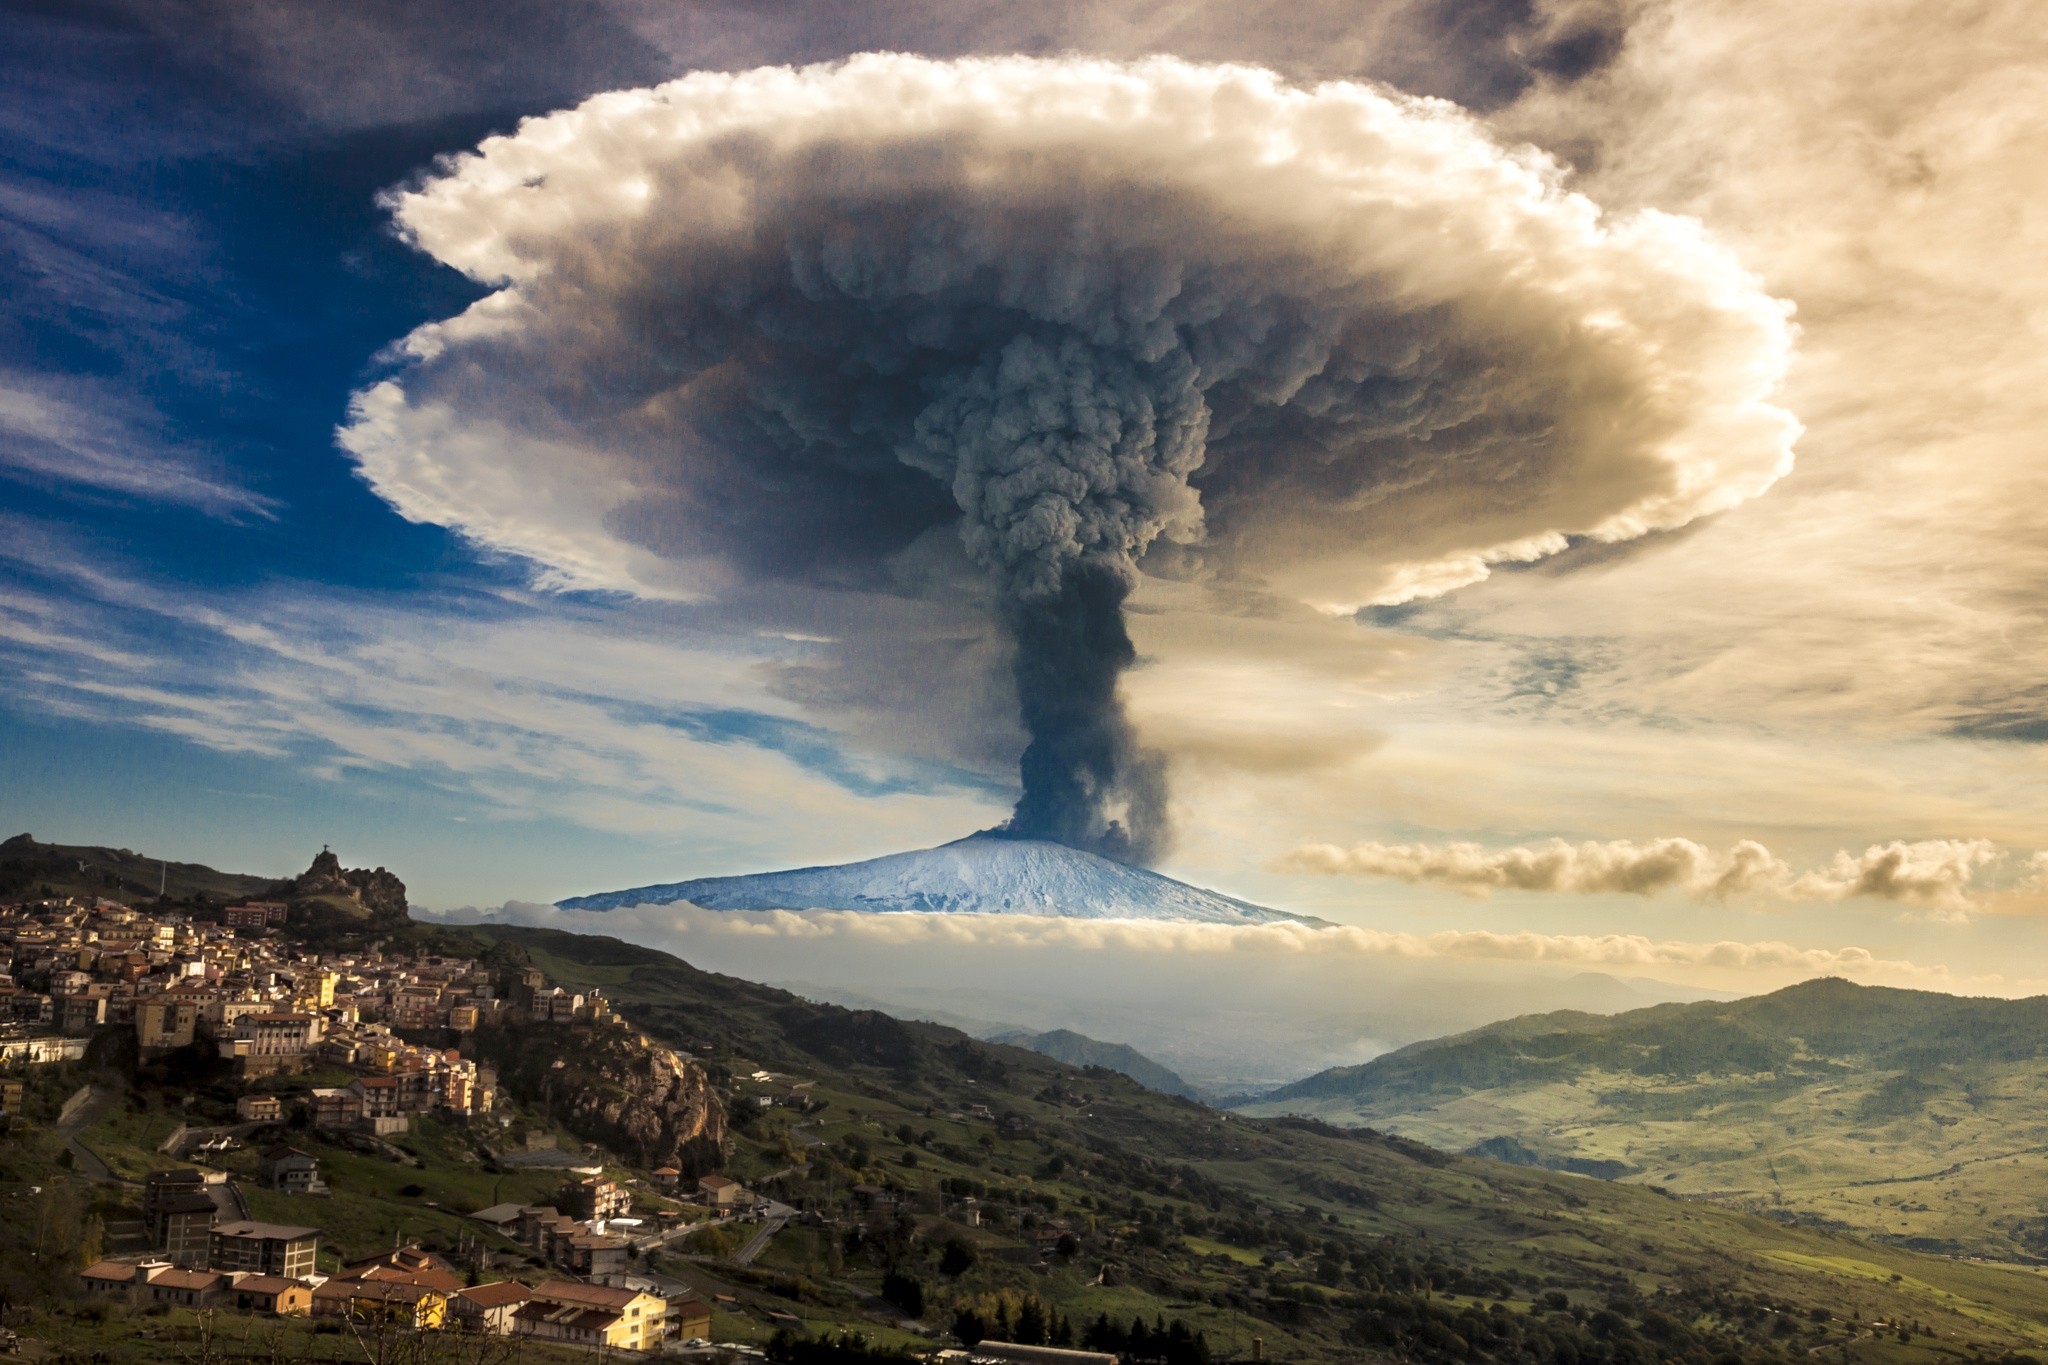 General 2048x1365 nature volcano eruption Sicily Italy snowy peak mushroom smoke sky clouds town mountains Mount Etna volcanic eruption